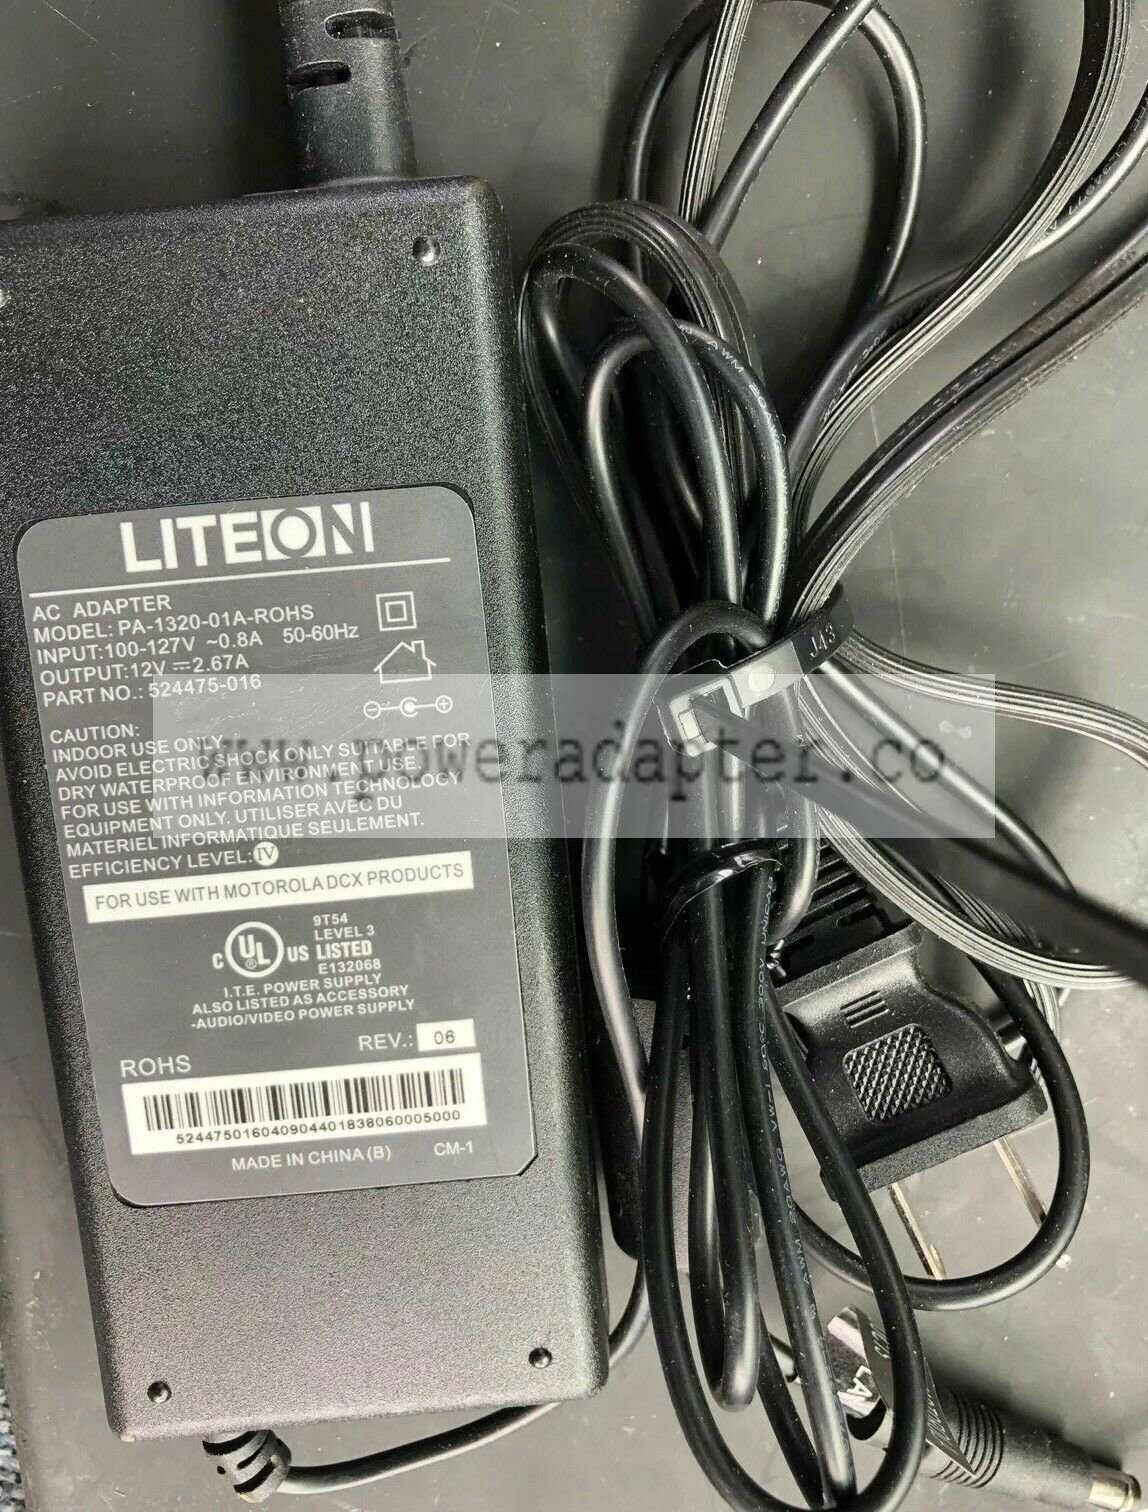 LiteOn PA-1320-01A-ROHS 524475-016 AC Adapter 12V 2.67A OEM Free Shipping Brand: LiteOn Output Voltage(s): 12V Type: - Click Image to Close